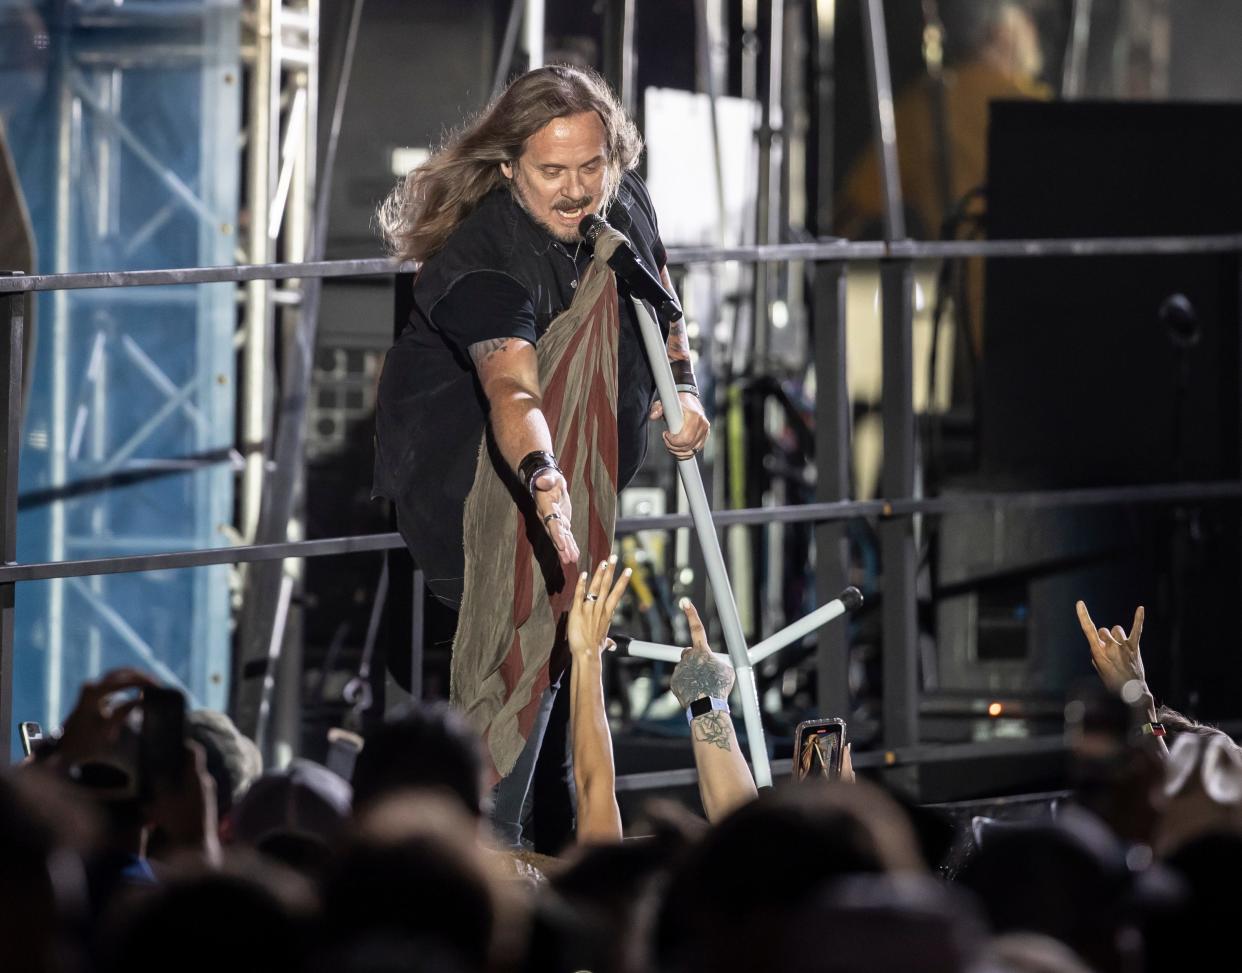 Johnny Van Zant performs with Lynyrd Skynyrd as the headliner for the Gulf Coast Jam last summer in  Panama City Beach. Saturday, Van Zant is expected to be a "surprise guest" at the Rock the Box 2 benefit concert at the Thrasher-Horne Center in Orange Park.